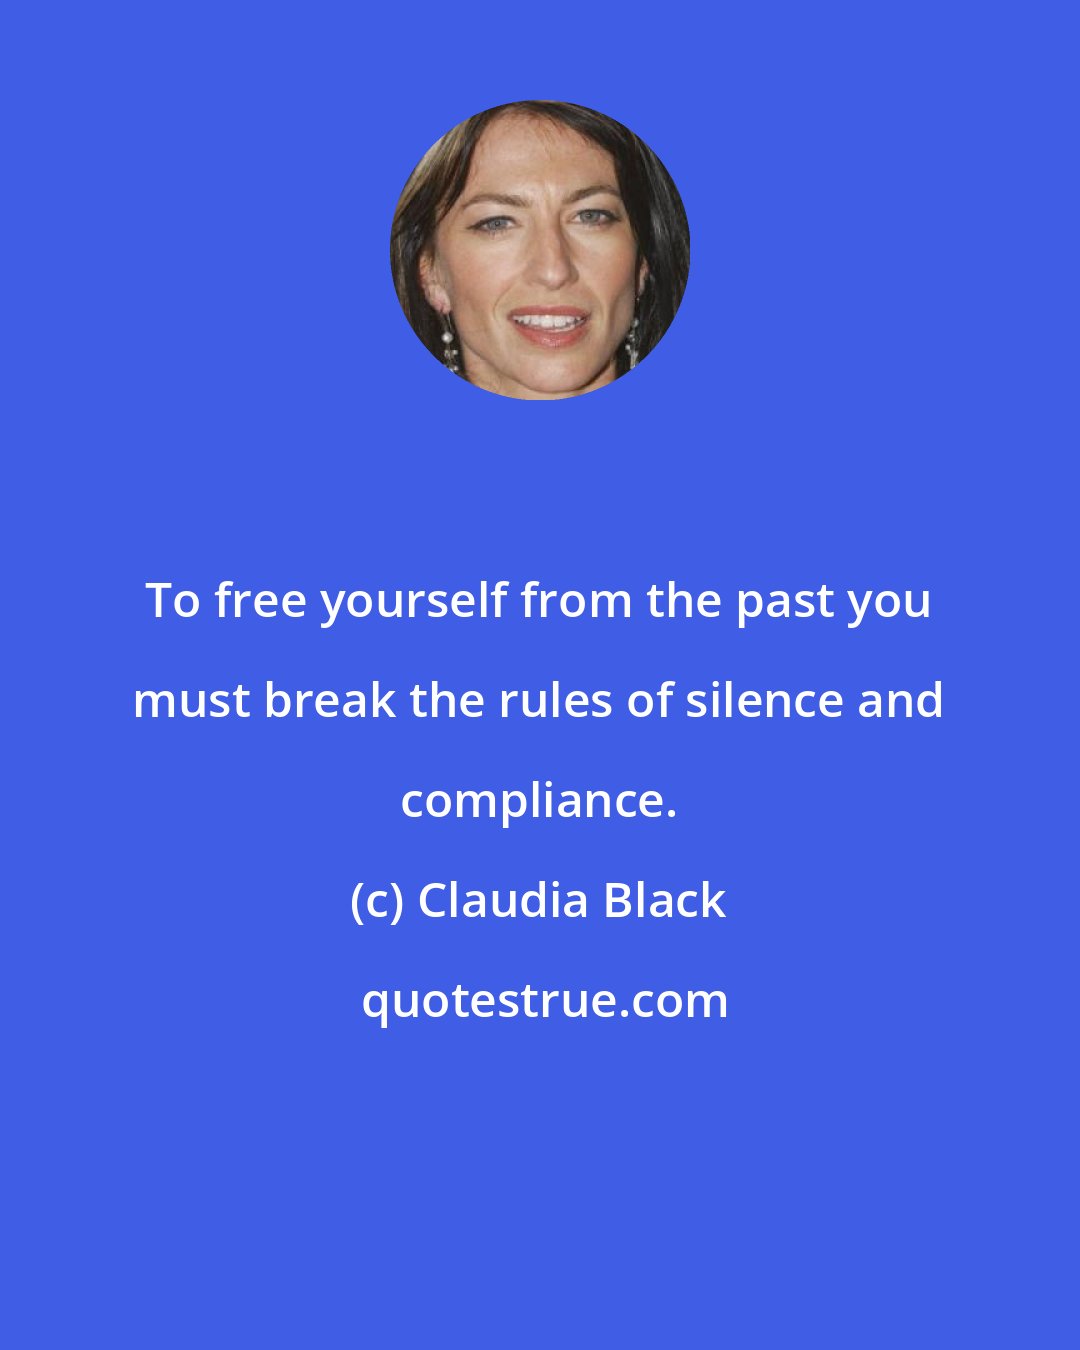 Claudia Black: To free yourself from the past you must break the rules of silence and compliance.